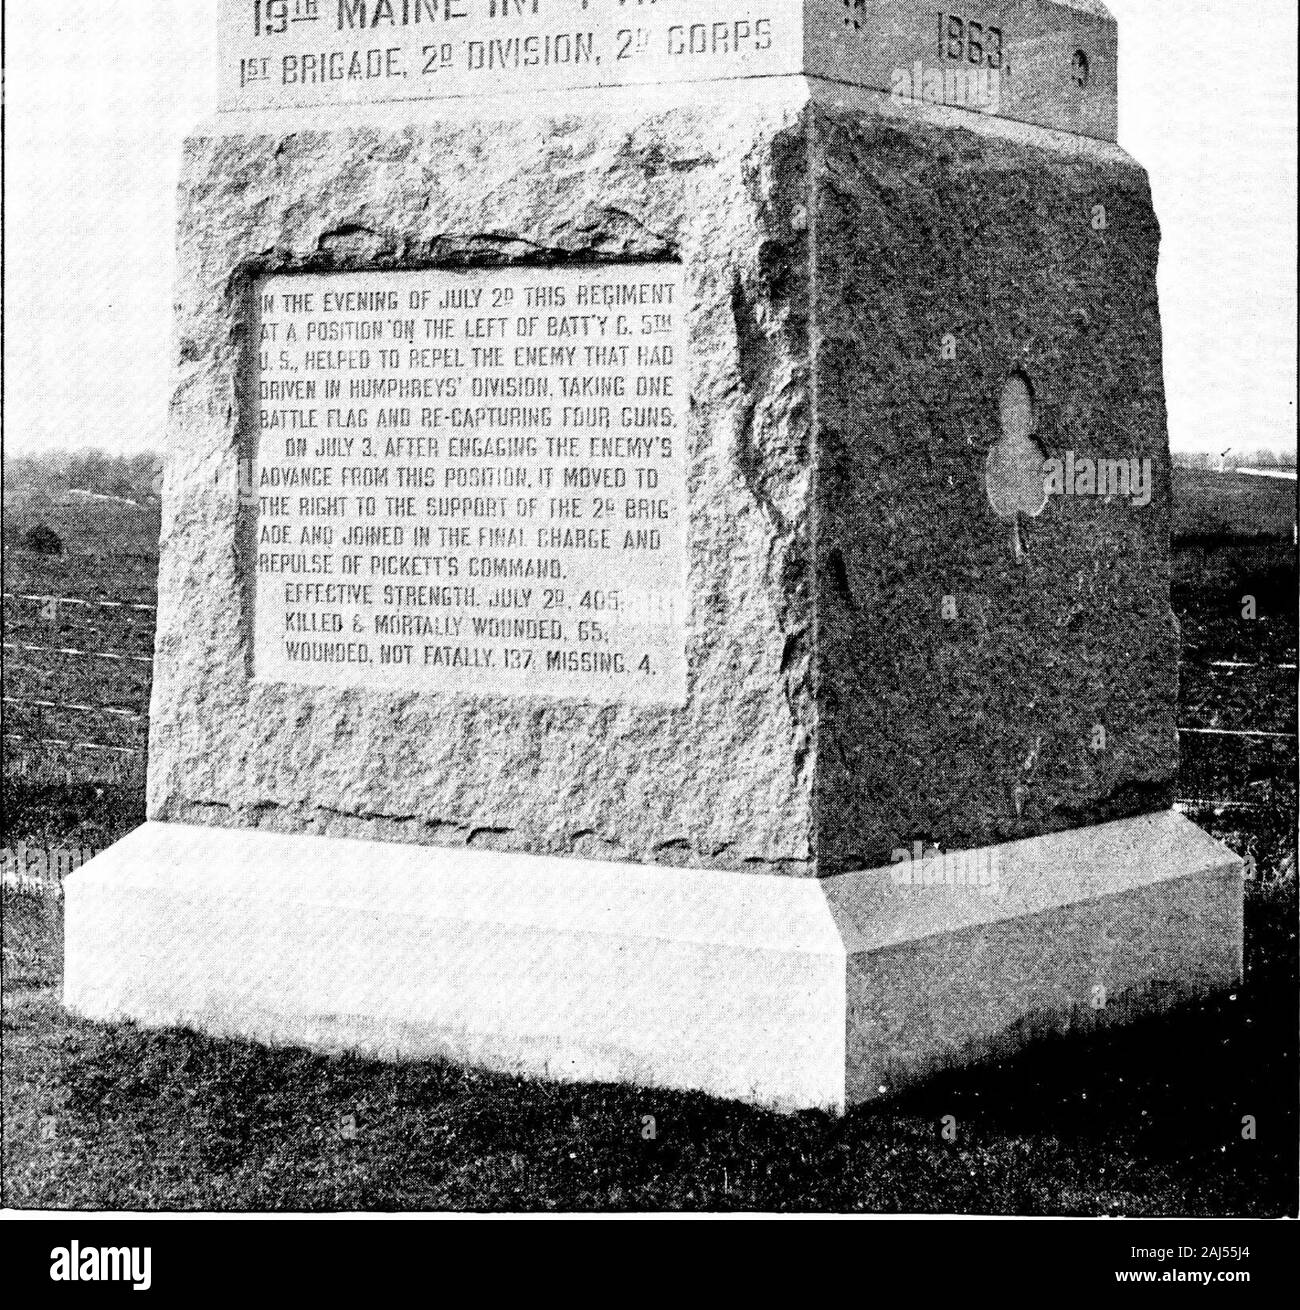 Maine at Gettysburg [electronic resource] . NINETEENTH MAINE REGIMENT. 289 MONUMENT. The monument, of cut Hallowell granite, is a massive cube, surmountedby a pyramidal top. It stands west of Hancock avenue, to the left of thecopse of trees known as the Bloody Angle, in the position held by the regi-ment while awaiting Picketts charge. Admeasurements: Base, 7 feet by 7 feet by 1 foot 8 inches; die, 6 feetby 6 feet by 5 feet 4 inches; apex, 5 feet 4 inches by 5 feet 4 inches by 5 feet7 inches. Total height, 12 feet 7 inches. Upon the faces of the cube are the date 1863, the trefoil of the Secon Stock Photo